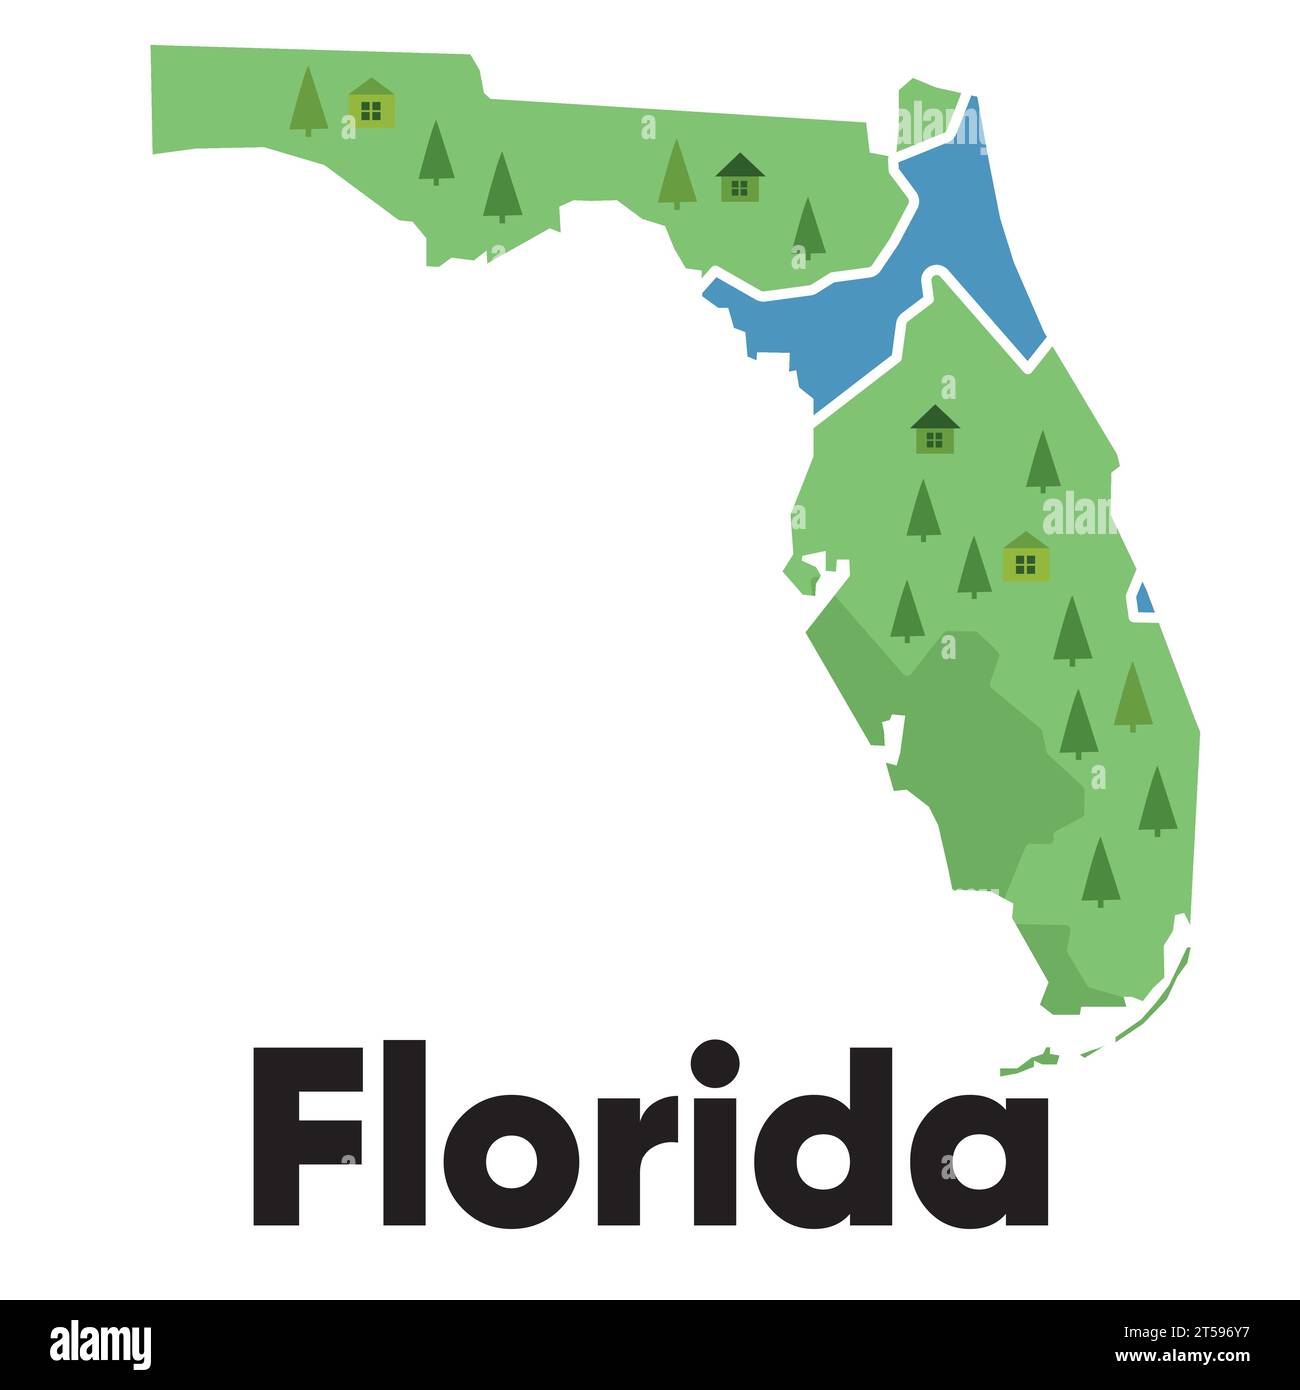 Florida map shape United states America green forest hand drawn cartoon style with trees travel terrain Stock Vector